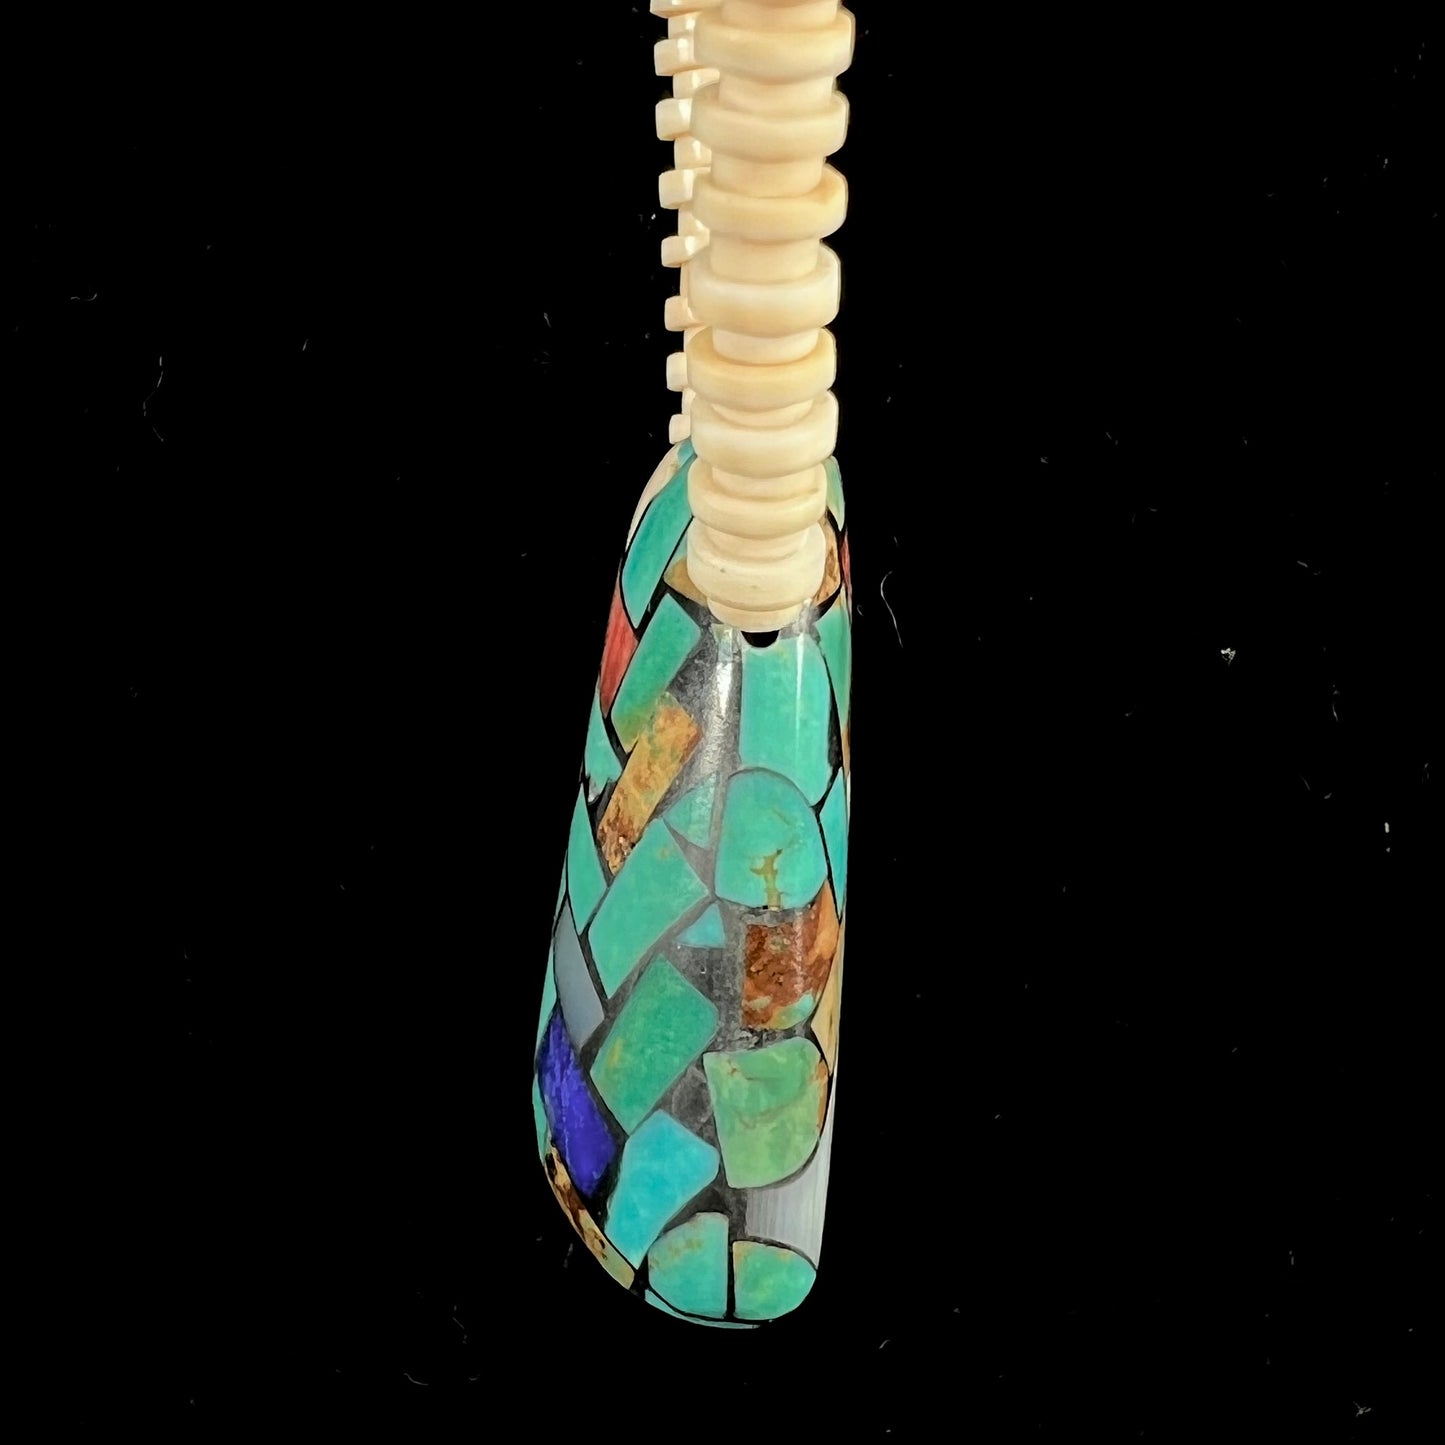 A three dimensional mosaic stone inlay pendant set with turquoise, lapis lazuli, coral, and mother of pearl on a puka shell necklace.